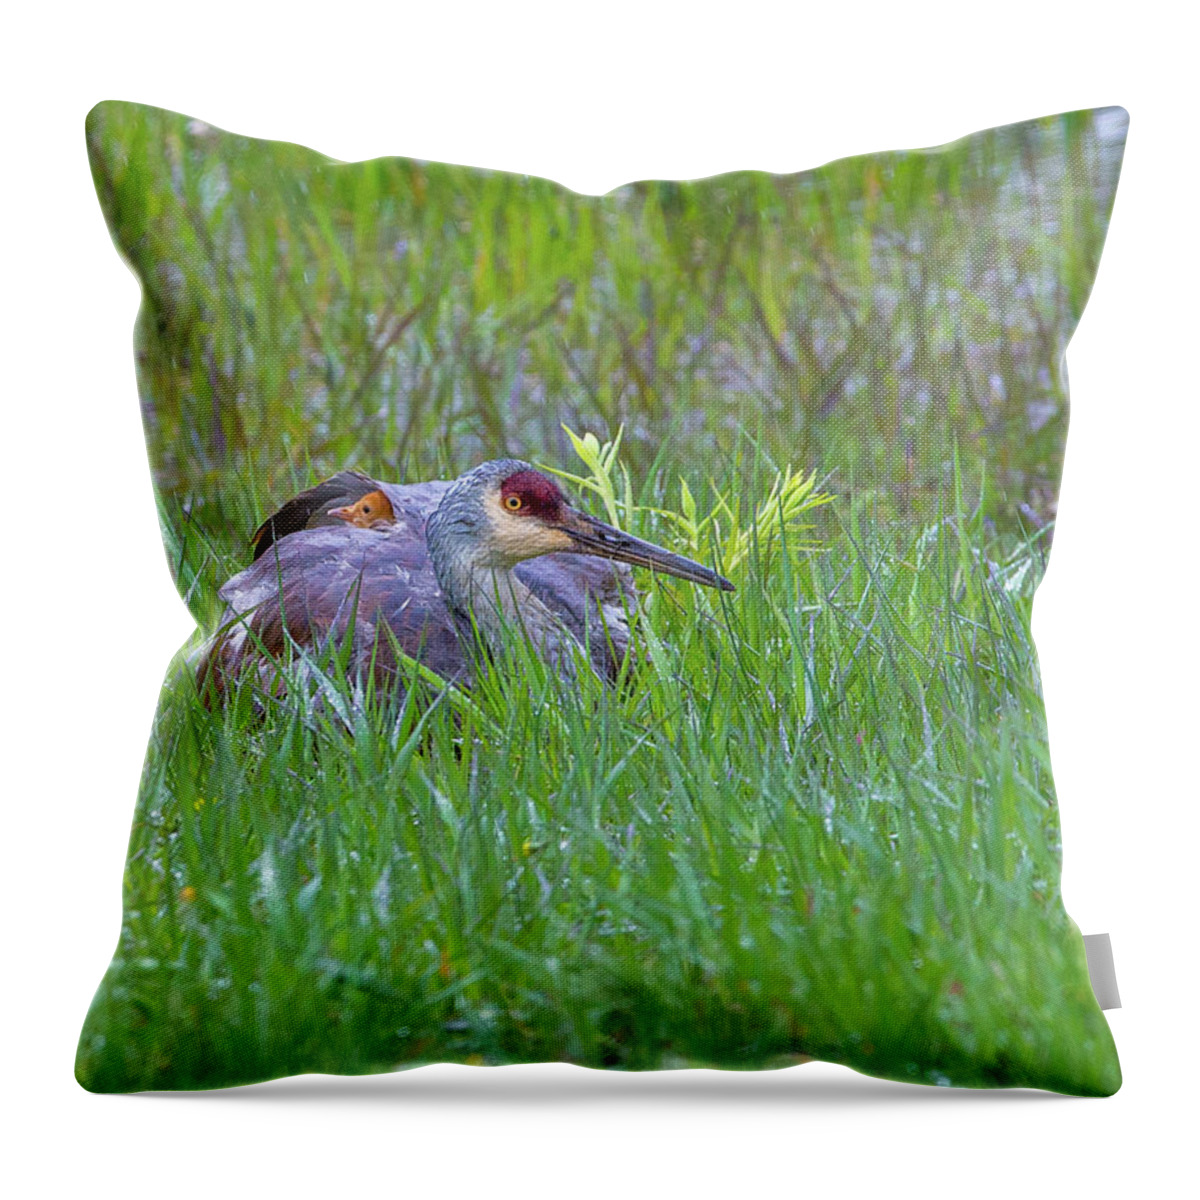 2019 Throw Pillow featuring the photograph Single For Now by Kevin Dietrich